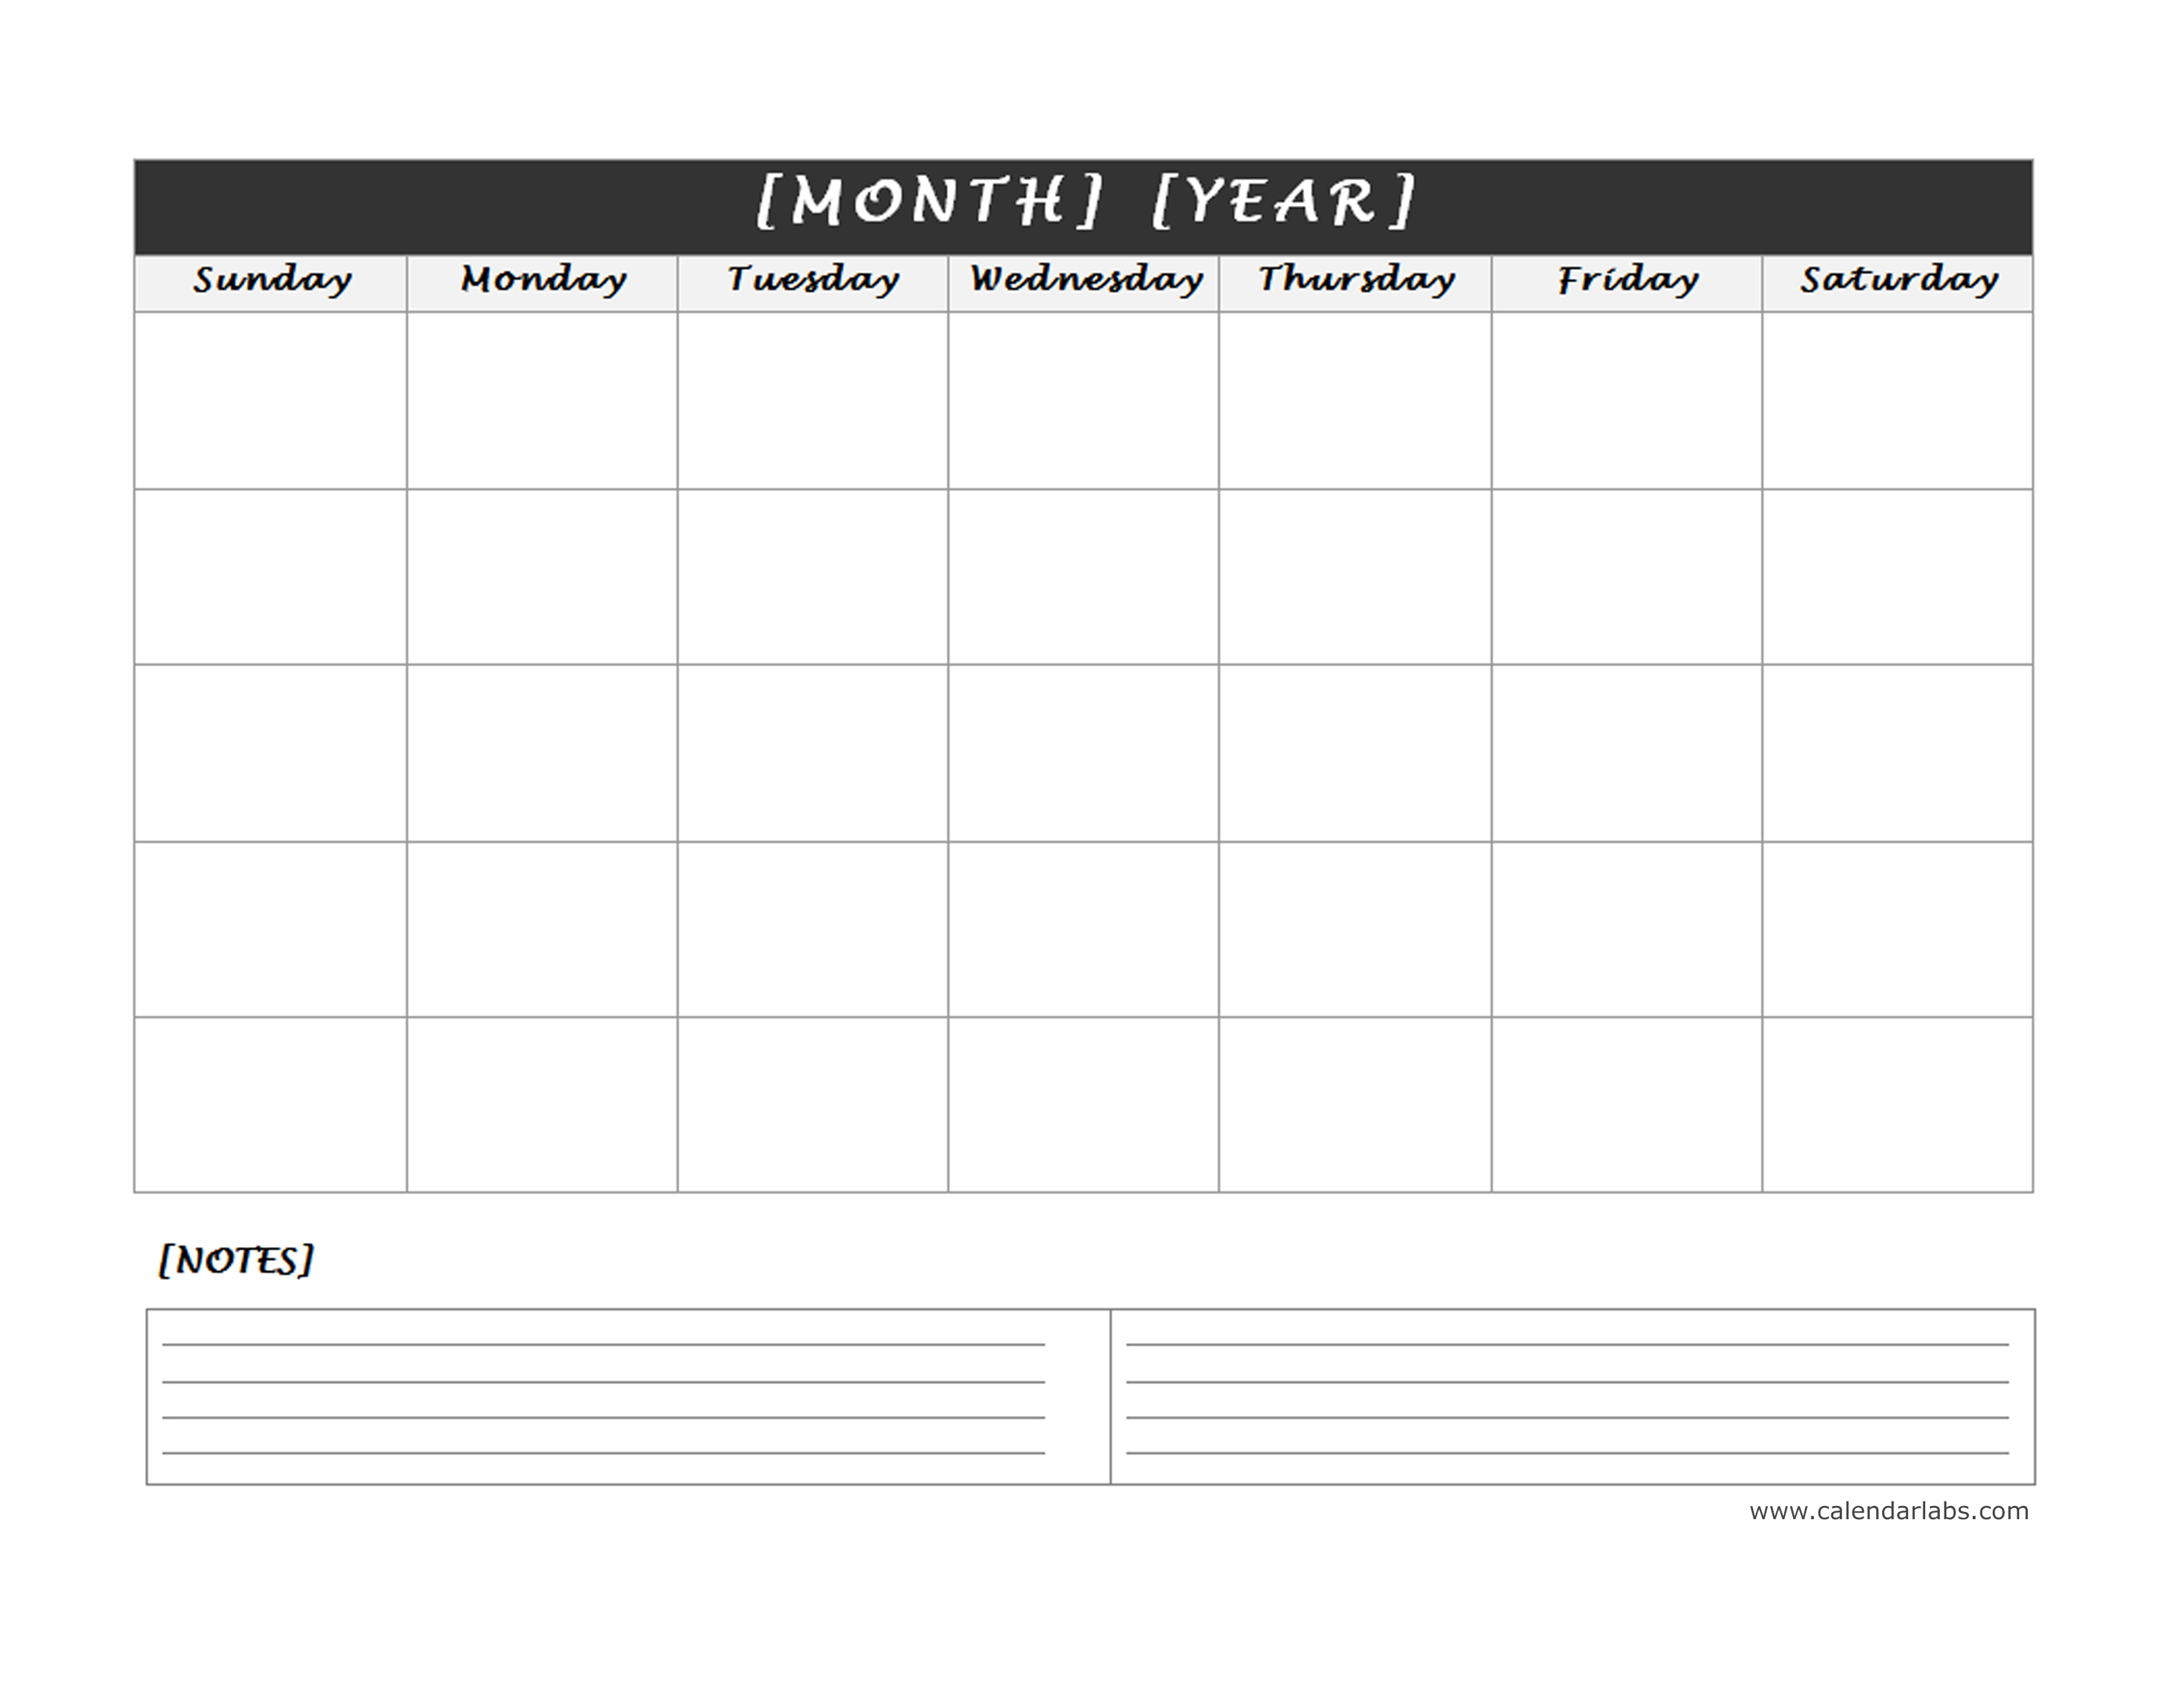 calendar template with notes section 41